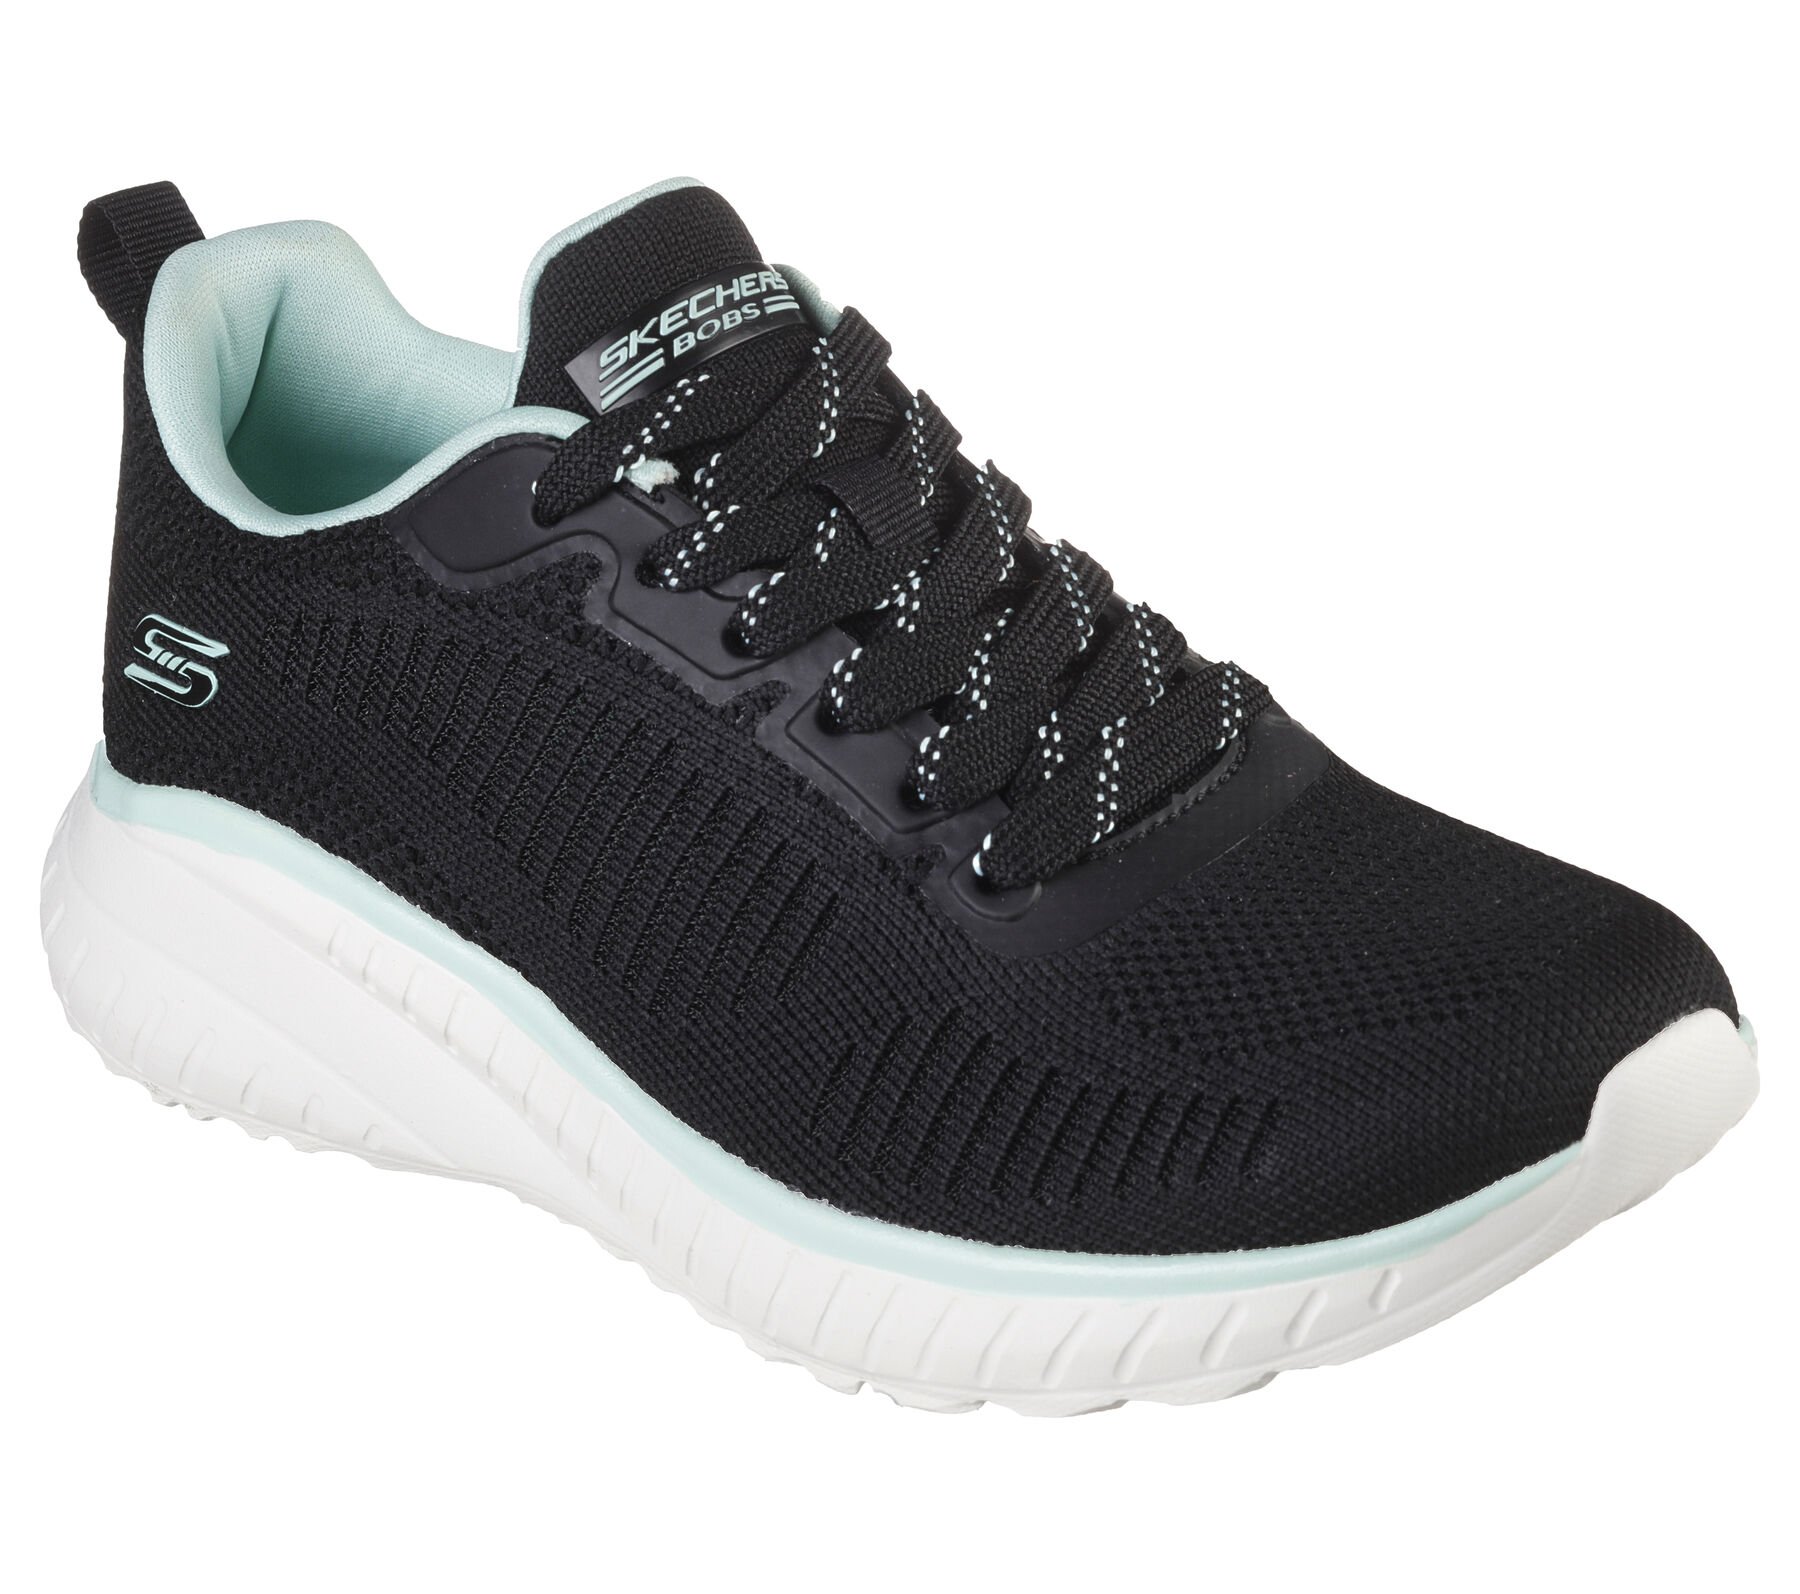 BOBS Squad Chaos - Parallel Lines | SKECHERS UK